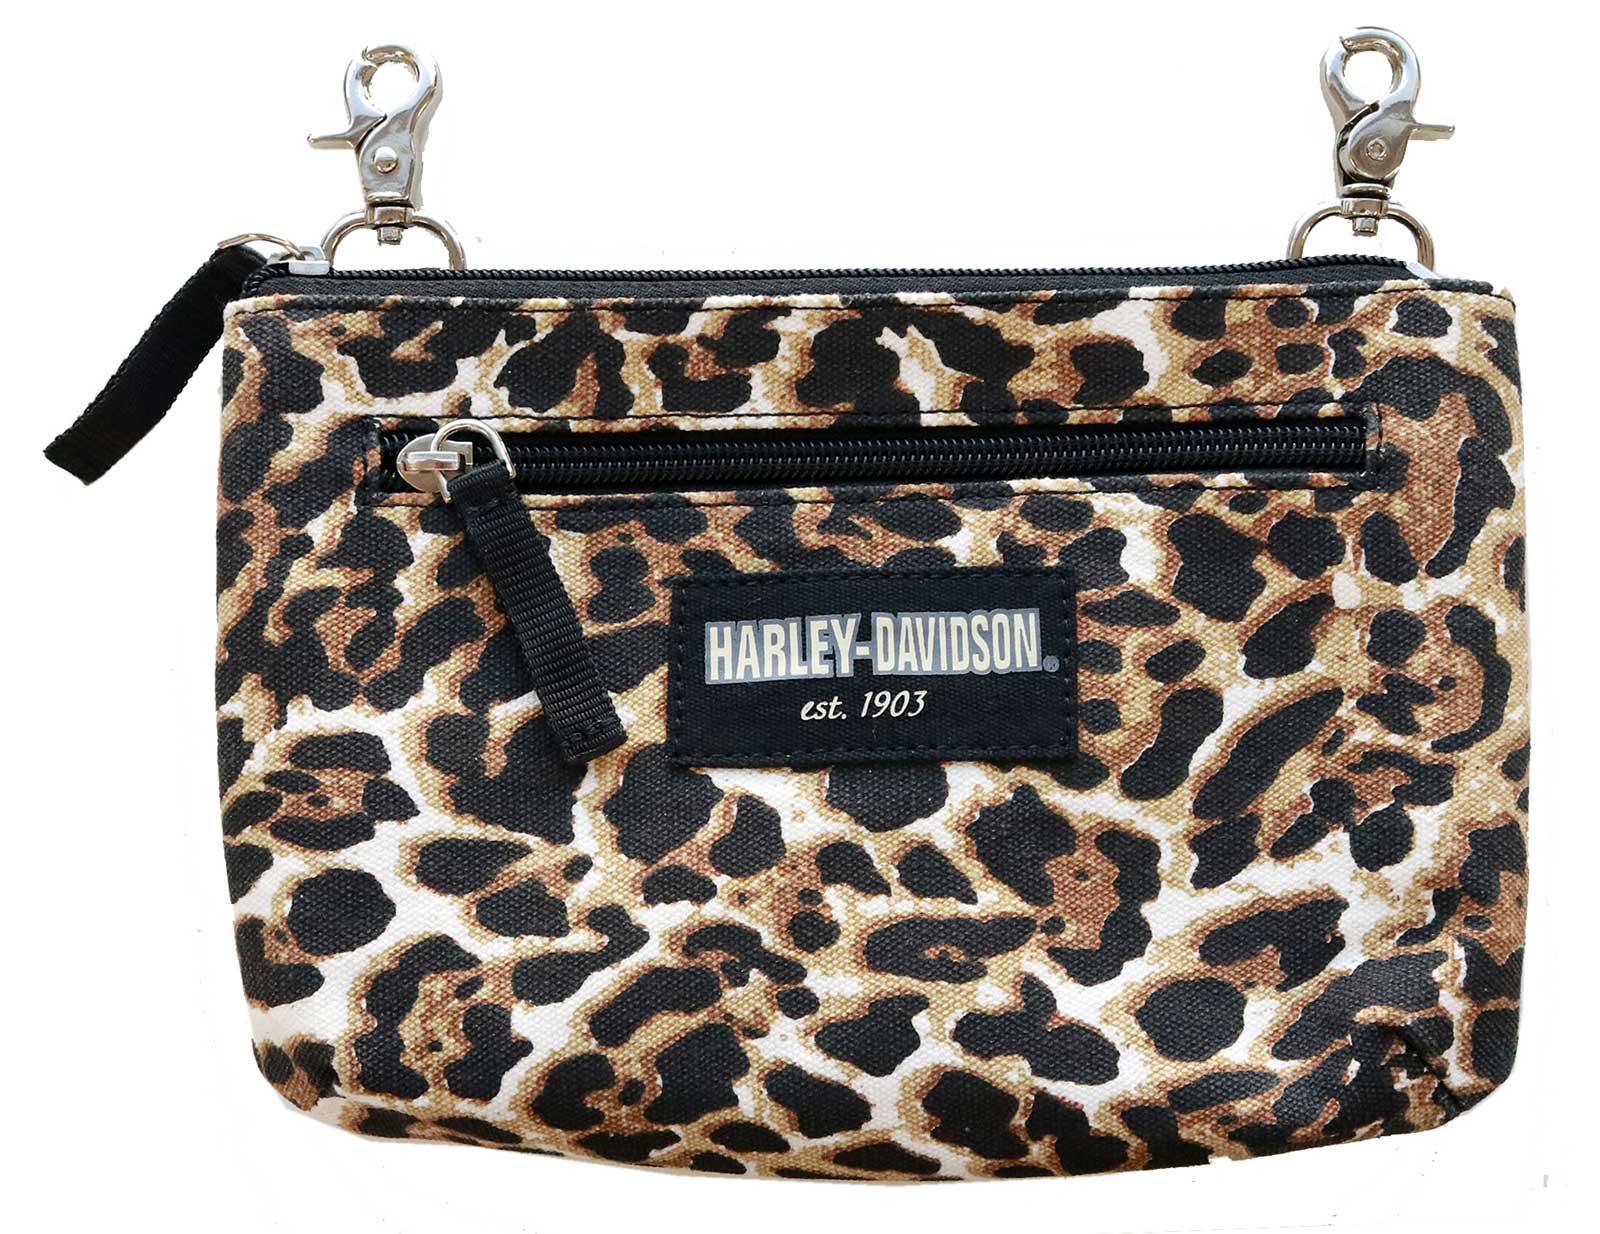 ♥ leopard purse with large white skull | Skull handbags, Bags, Bag  accessories